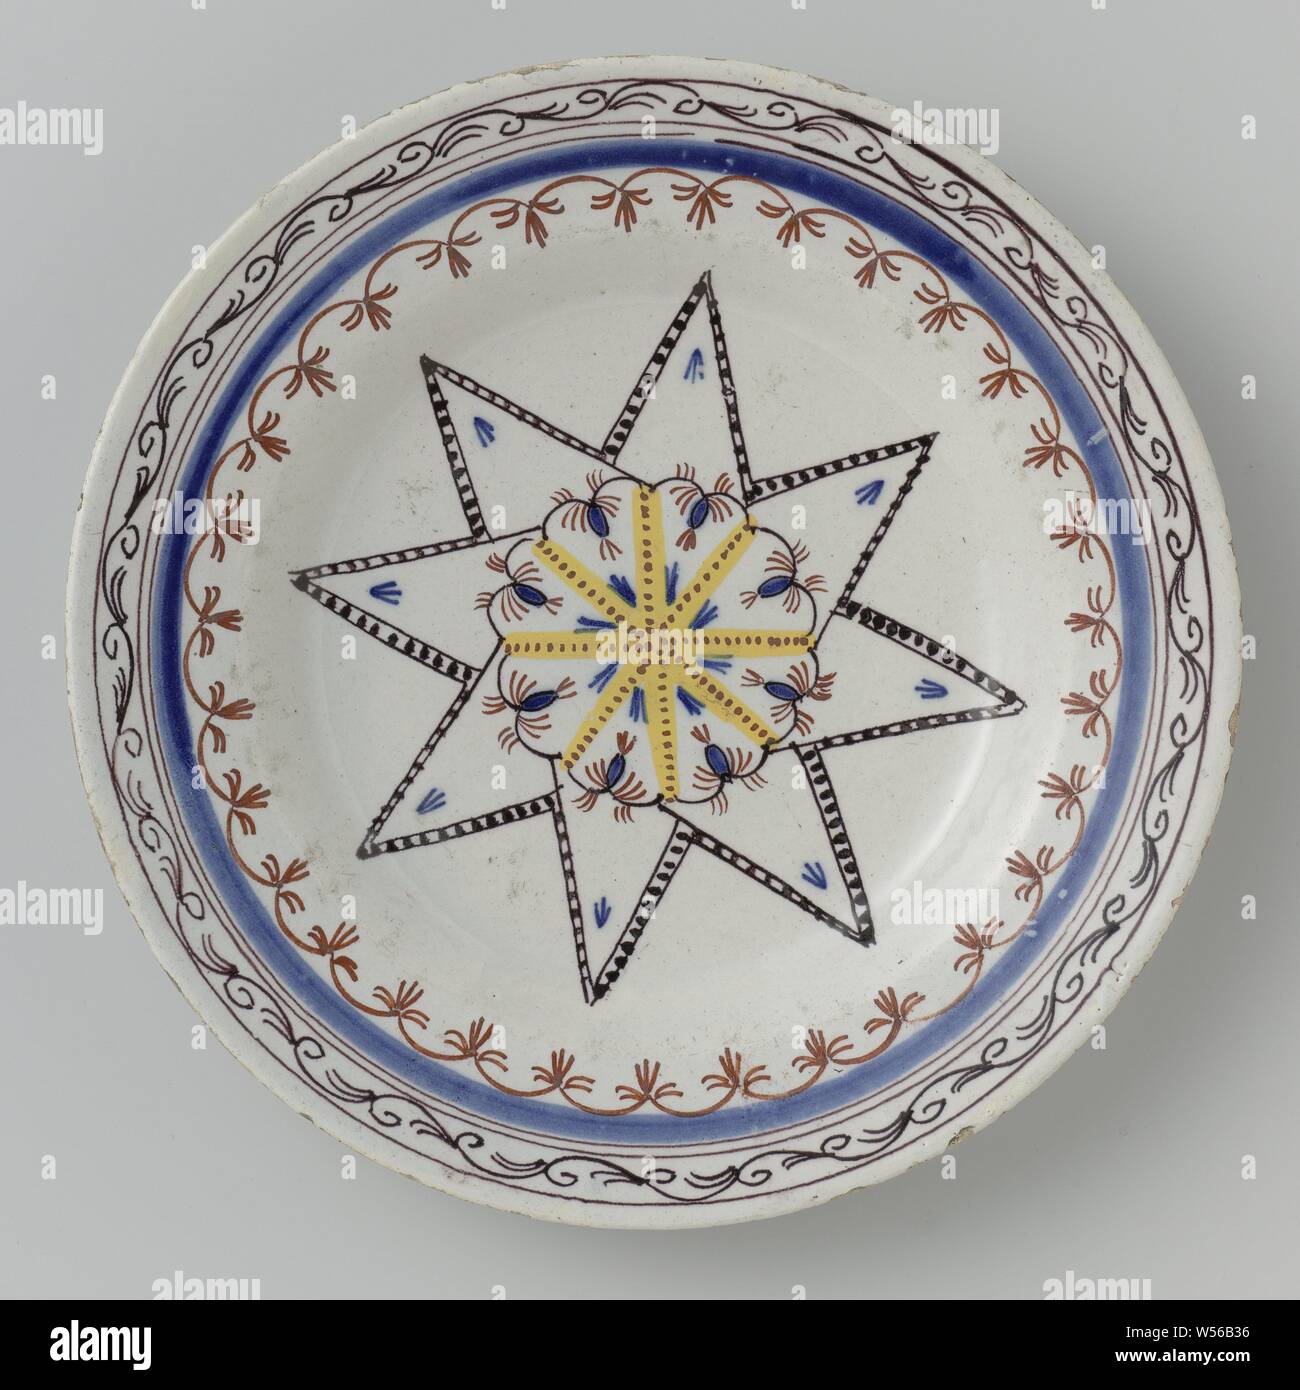 Plate of faience, Plate of faience. Multicolored painted with a star and decorated edges., anonymous, Delft, 1770 - 1800, d 22.7 cm × h 3.1 cm Stock Photo